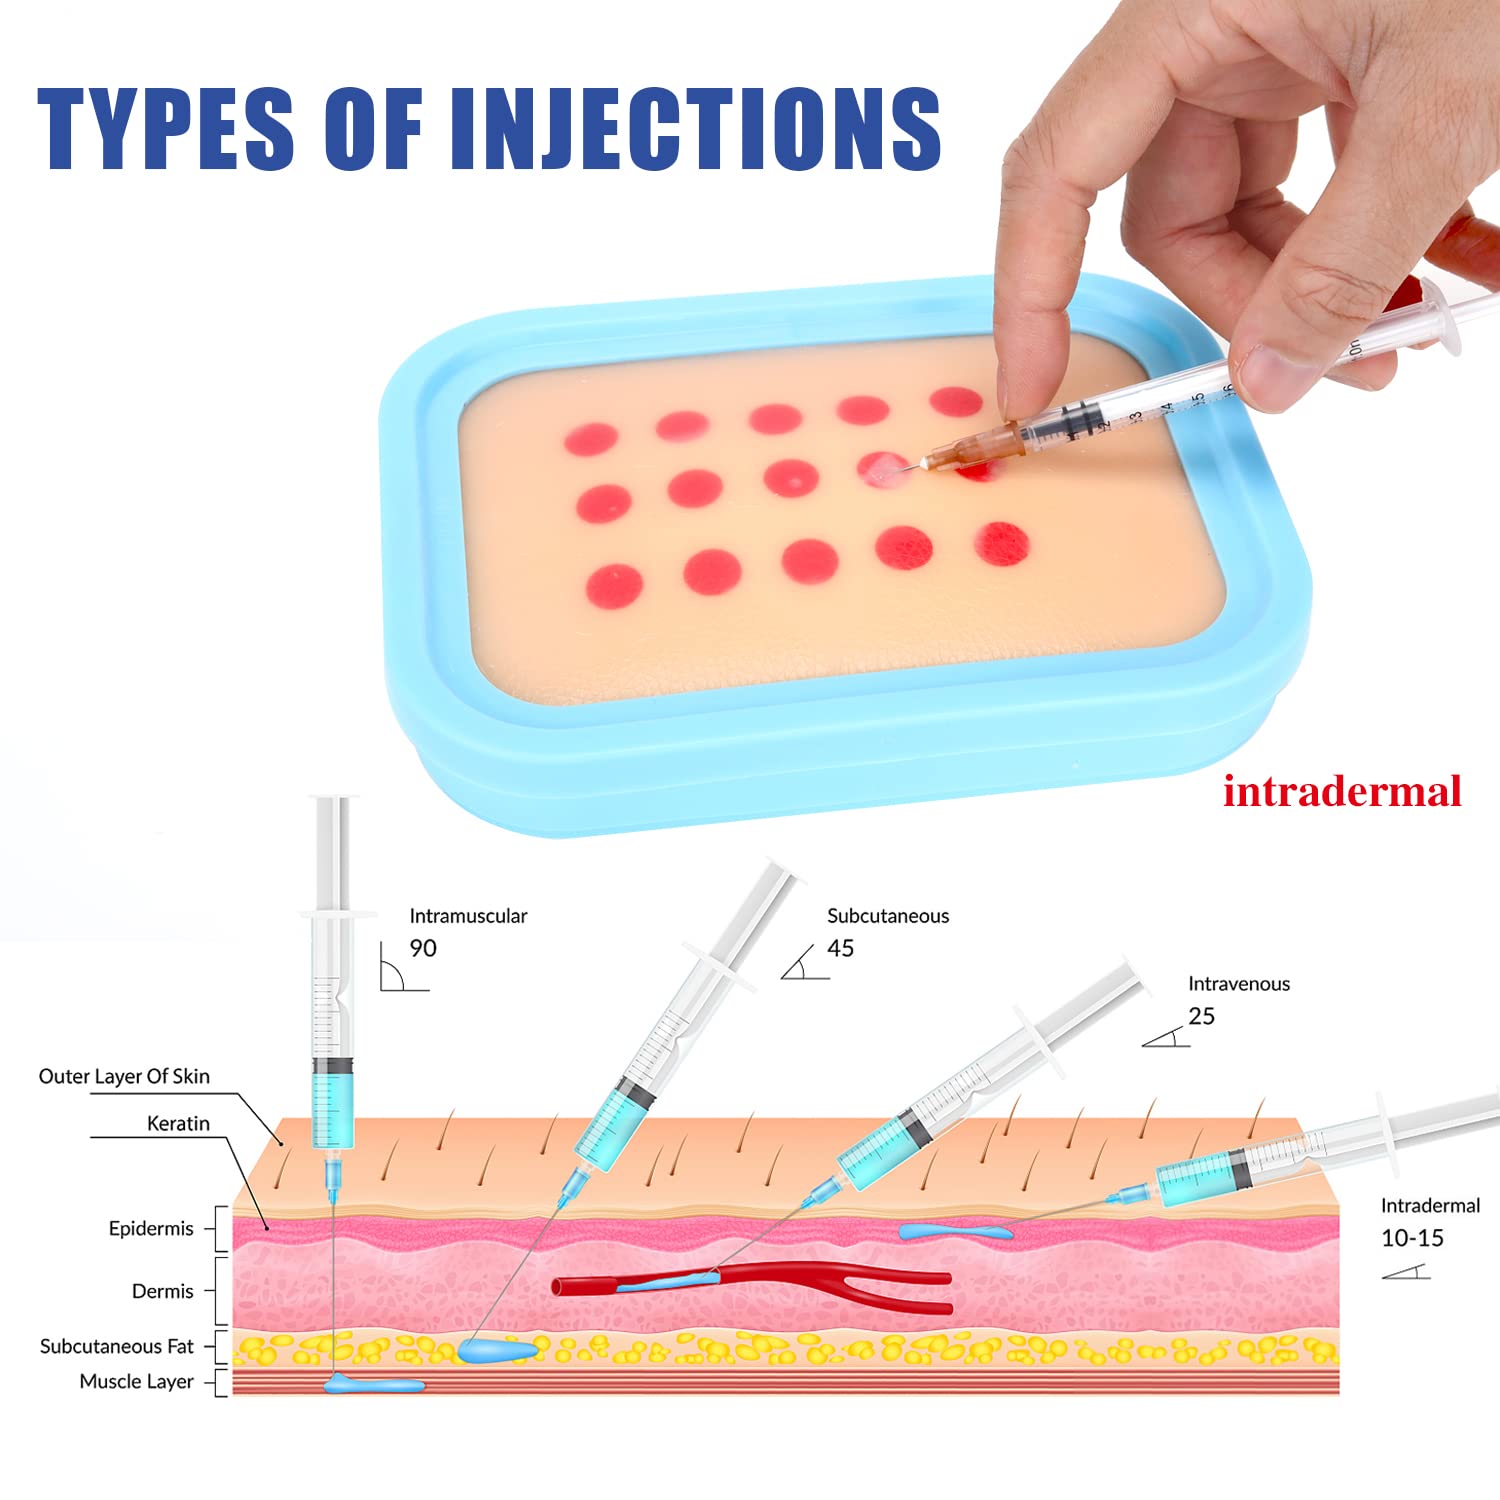 intradermal injection sites